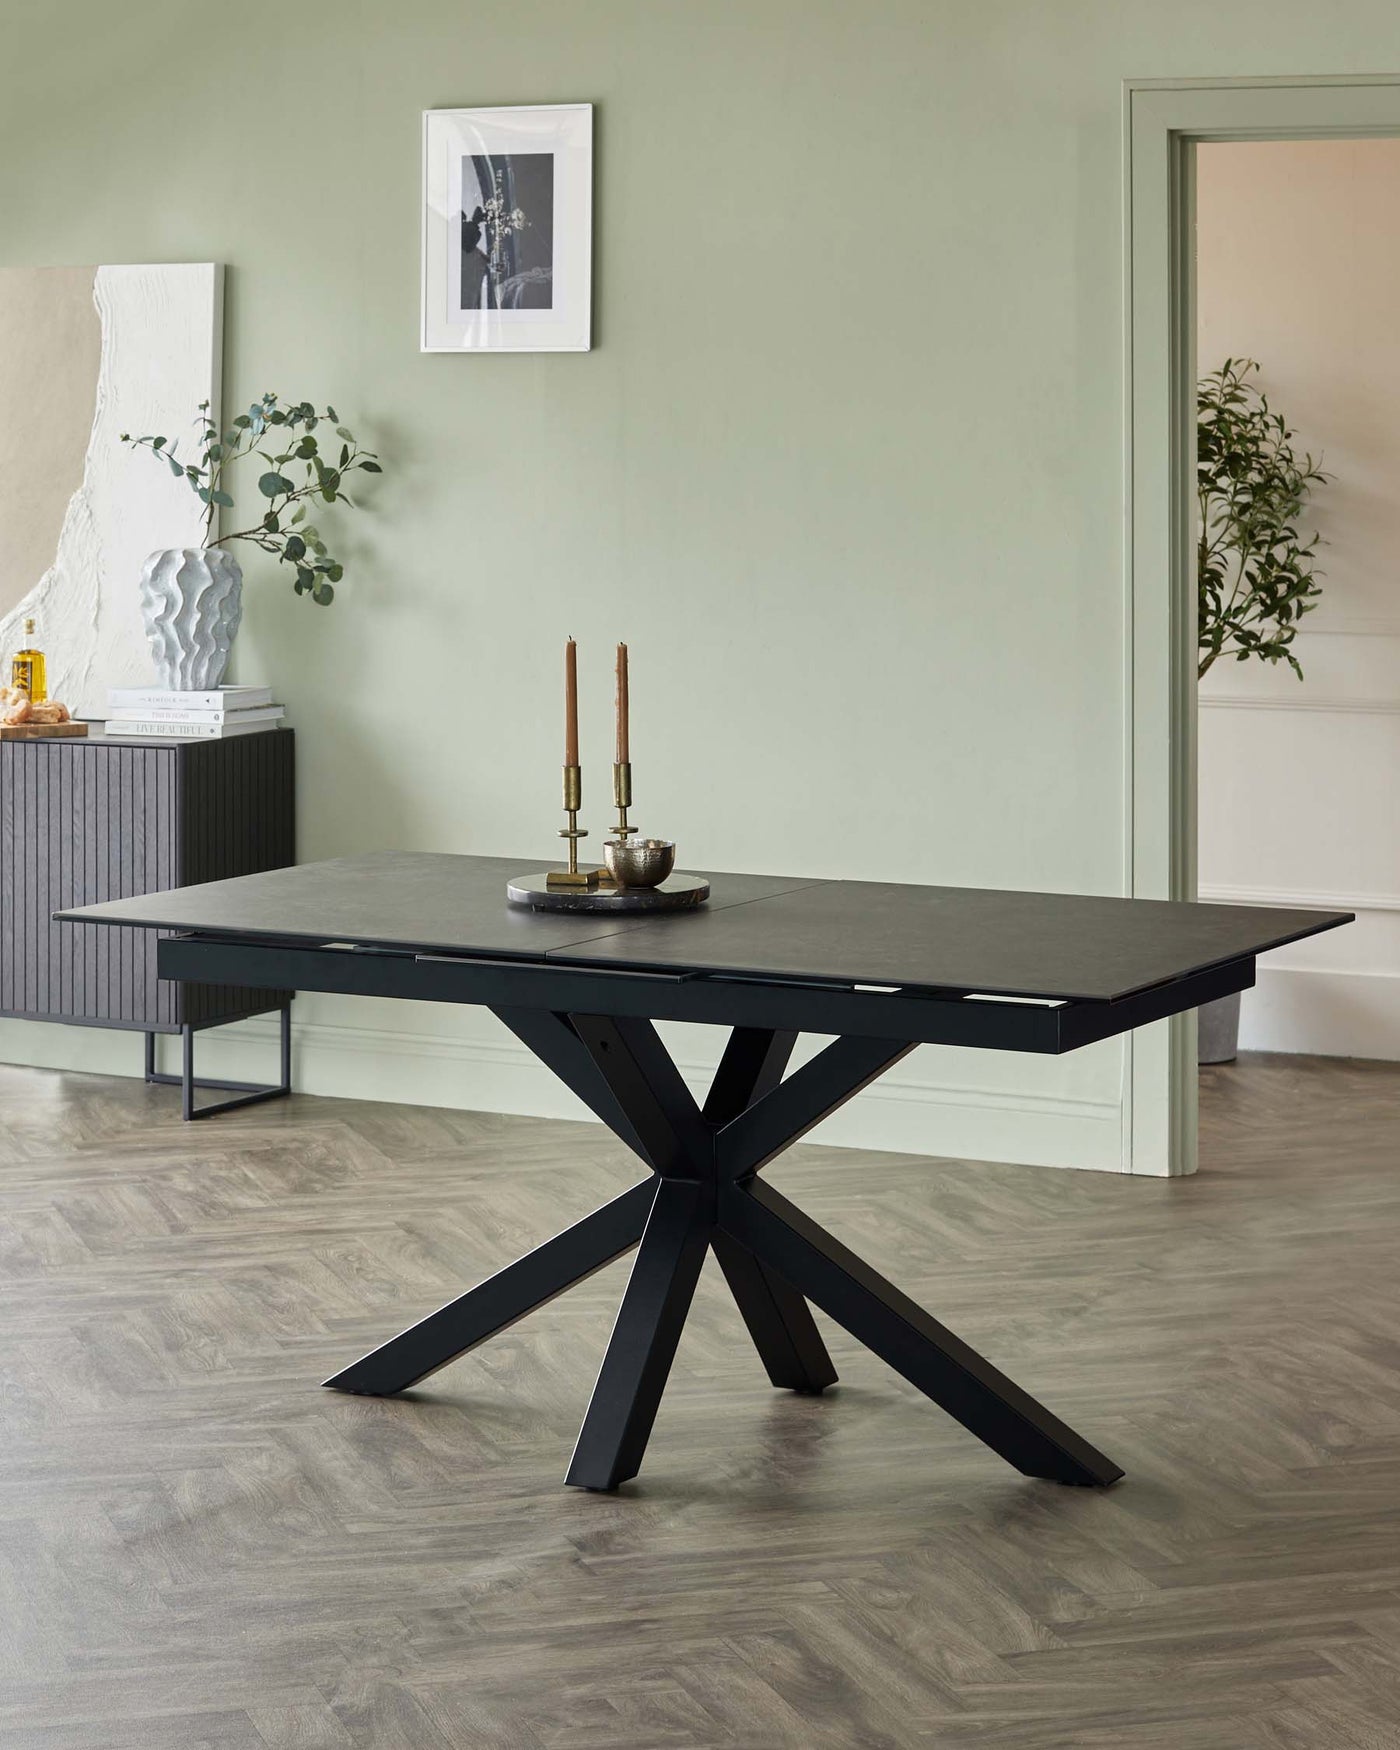 Modern rectangular dining table with a dark, textured tabletop and a bold, black crisscrossed leg design.